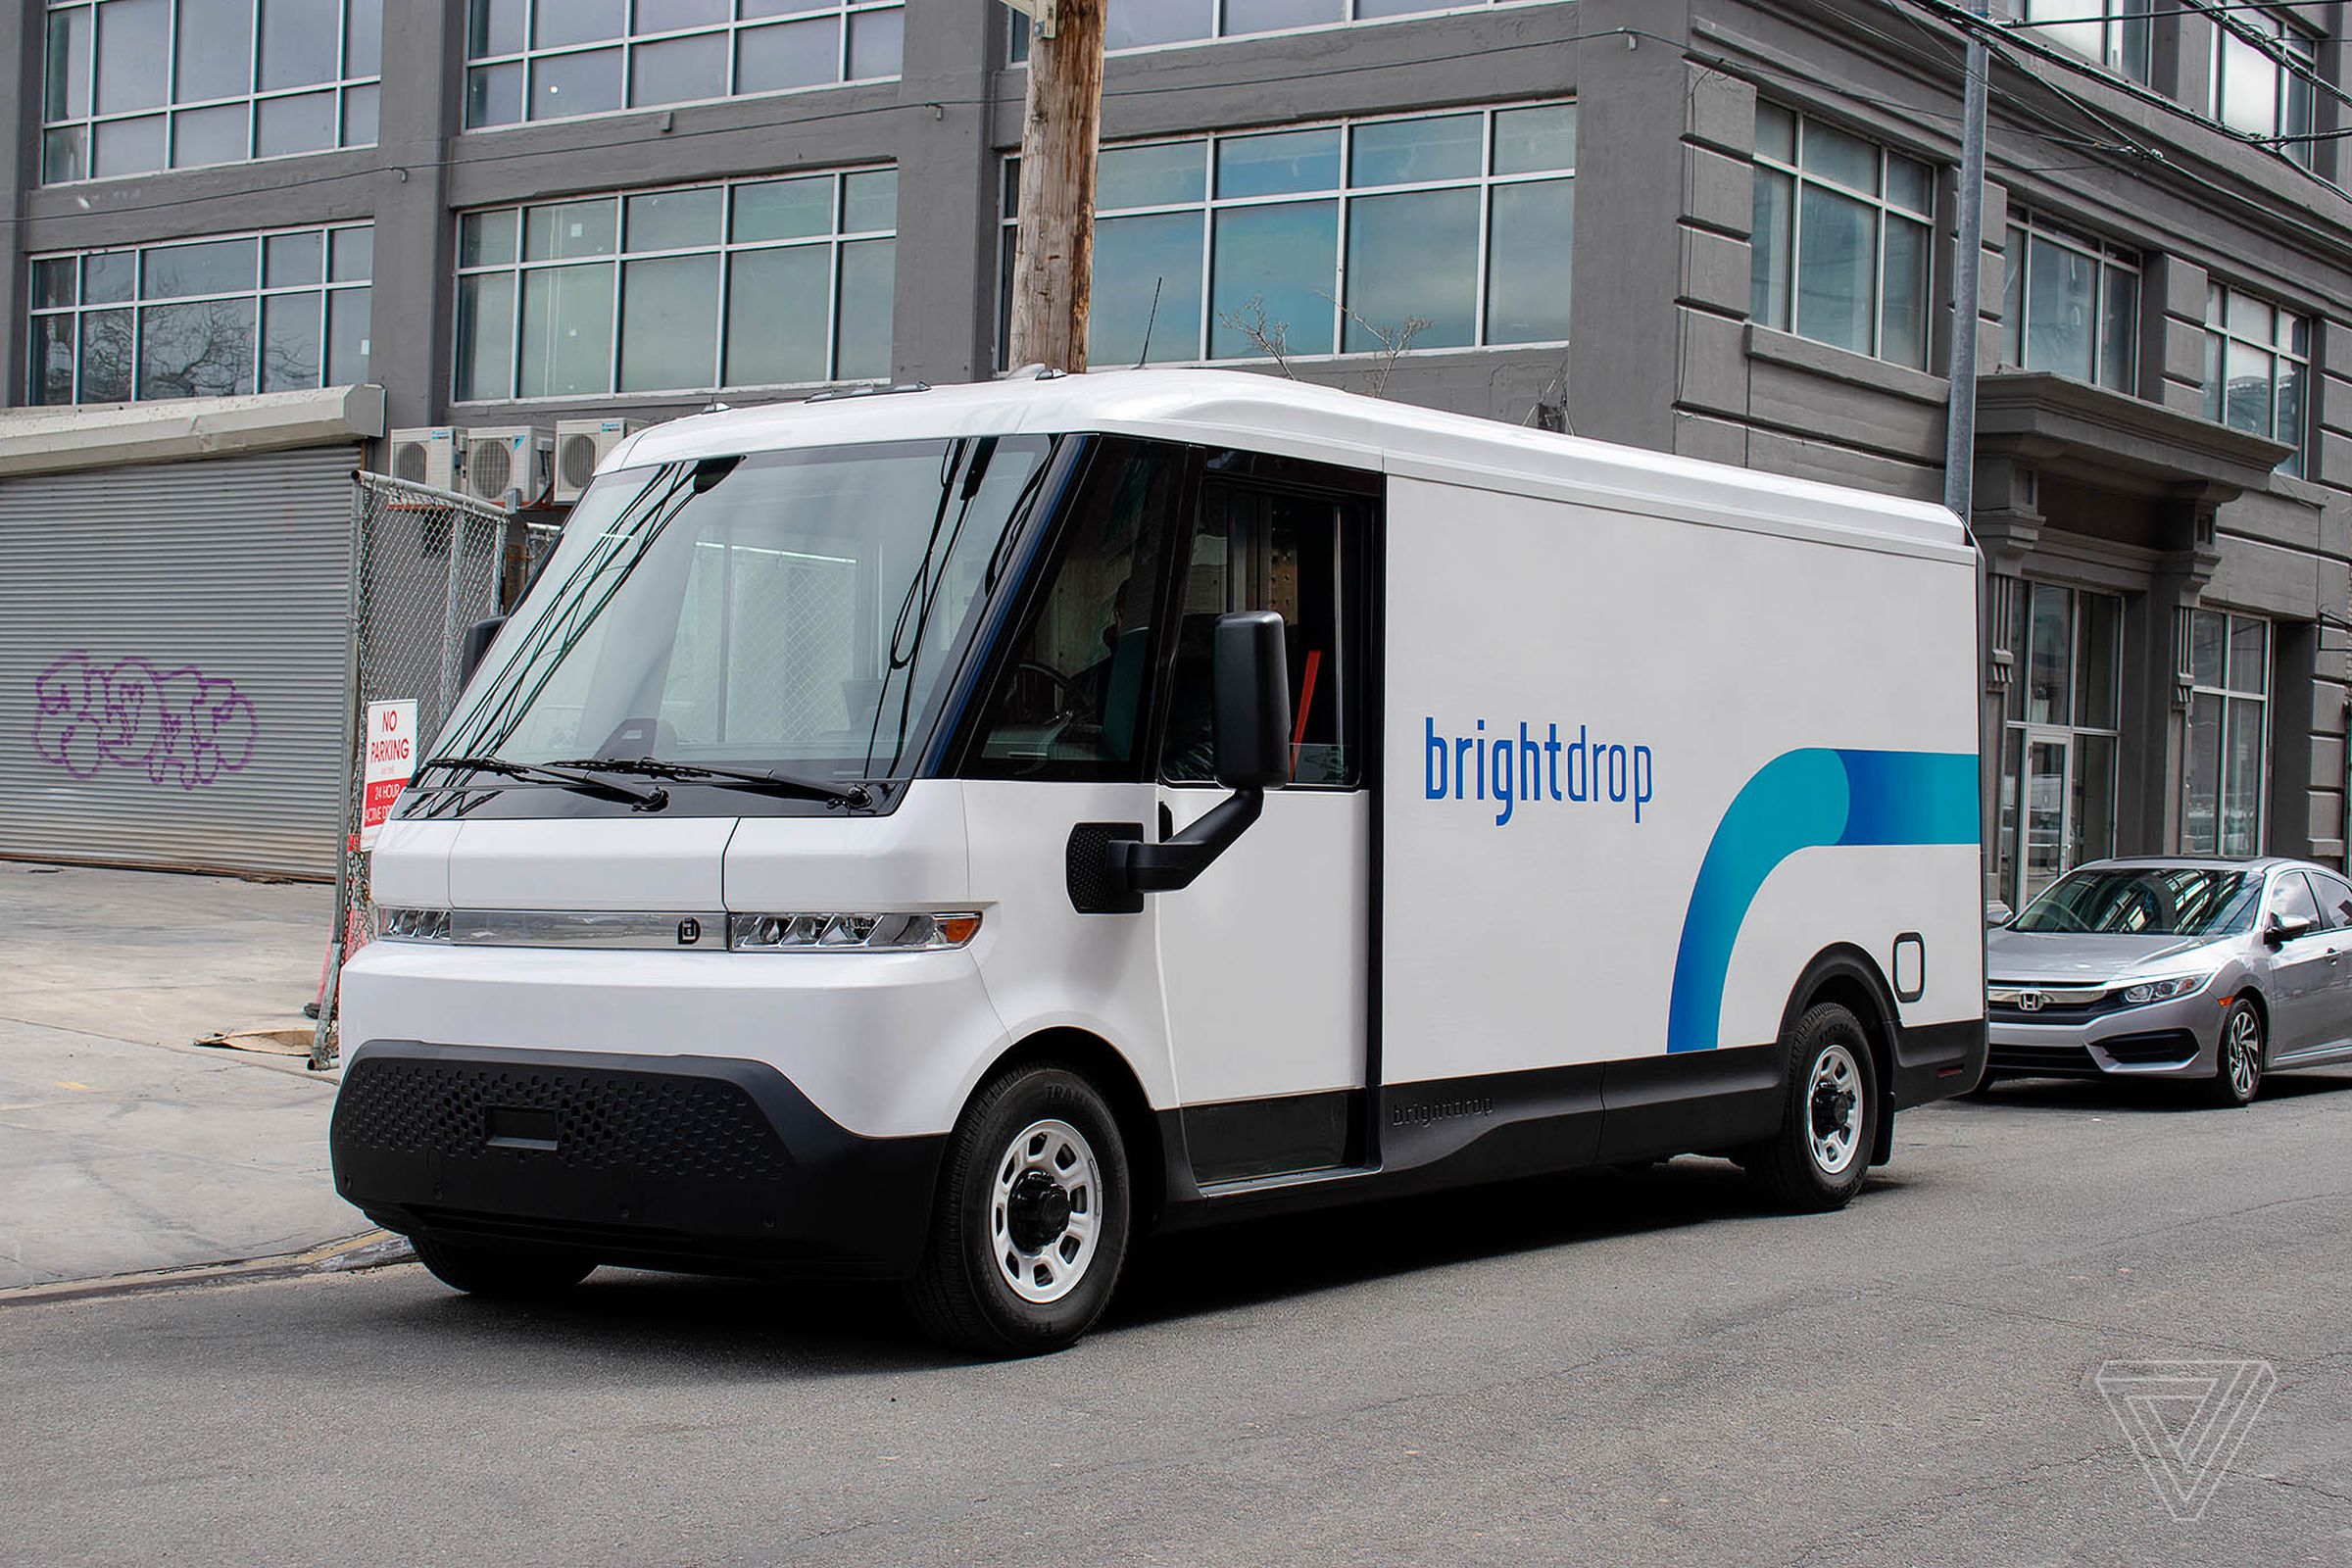 BrightDrop’s Zevo all-electric delivery vehicle.